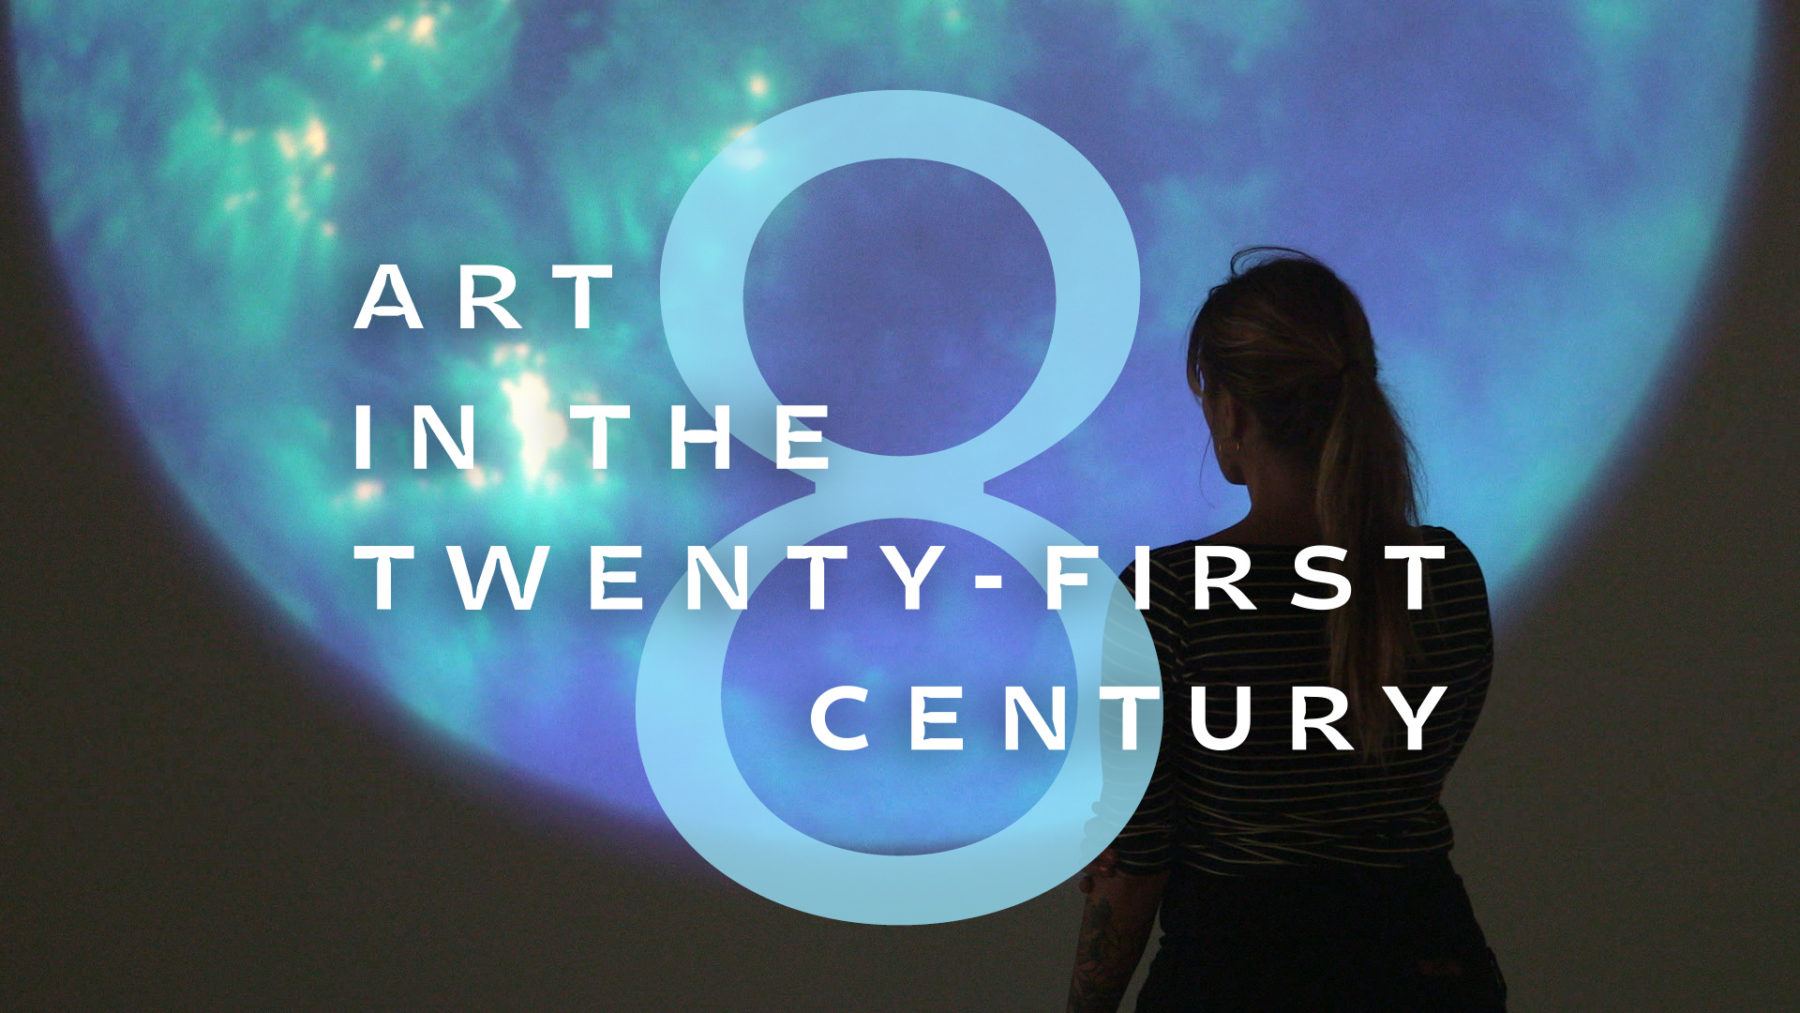 Art in the Twenty-First Century promotional picture with a person with long hair looking at a nebulous blue-green projection on a wall